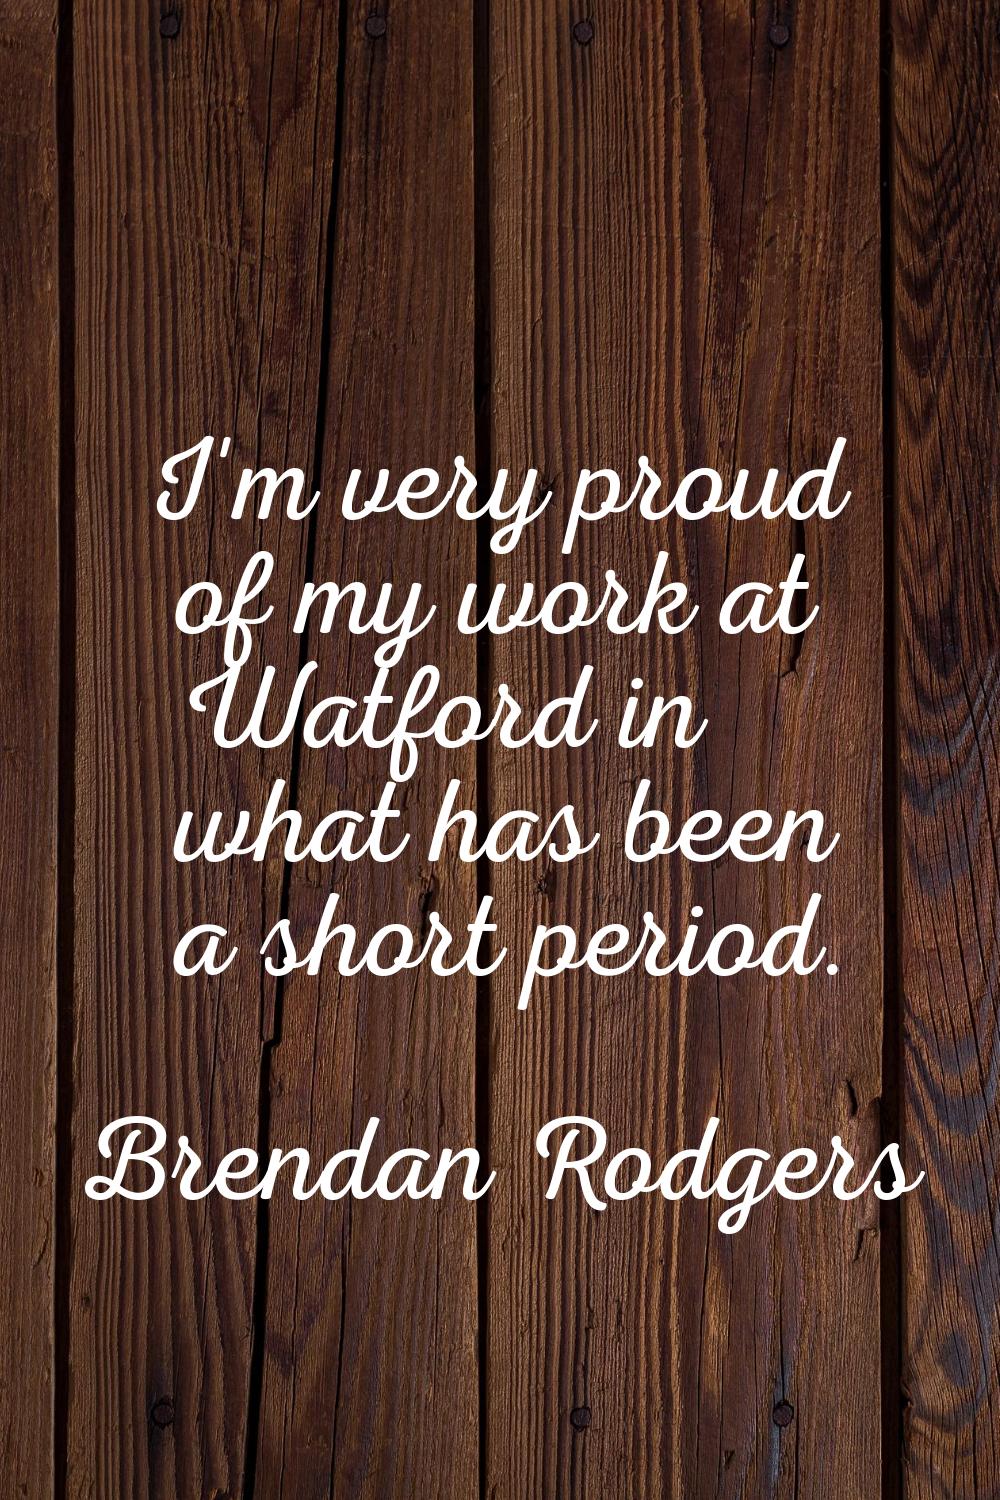 I'm very proud of my work at Watford in what has been a short period.